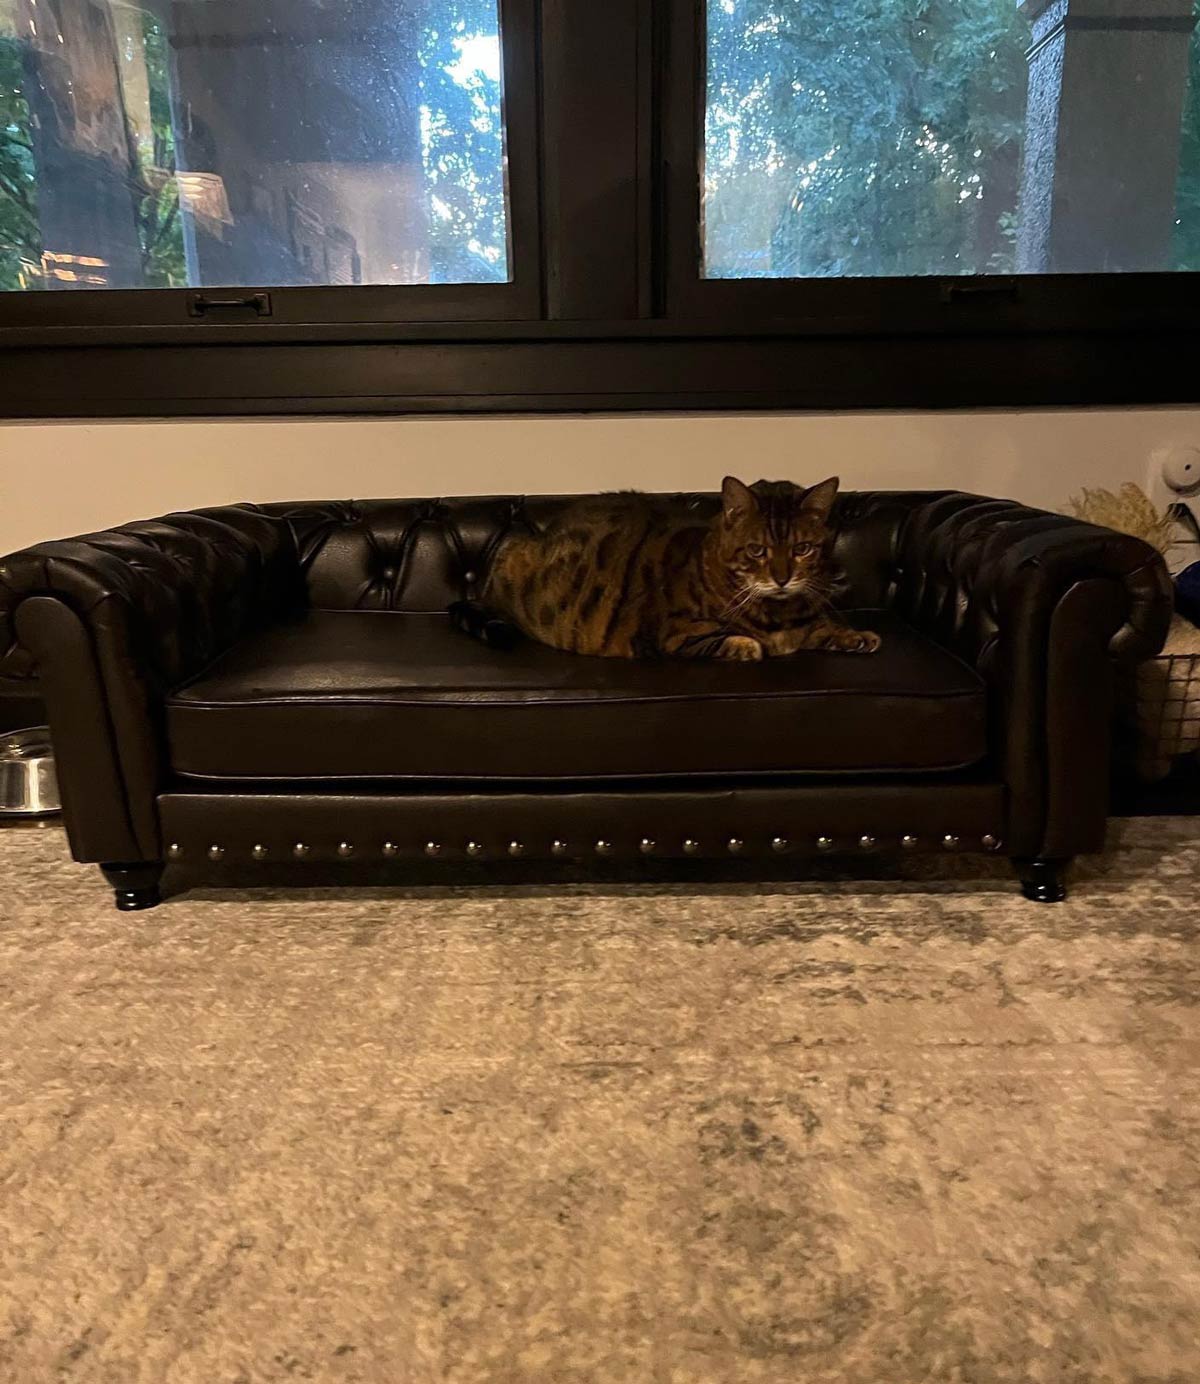 My wife got Hobbs a throne to plot our deaths on